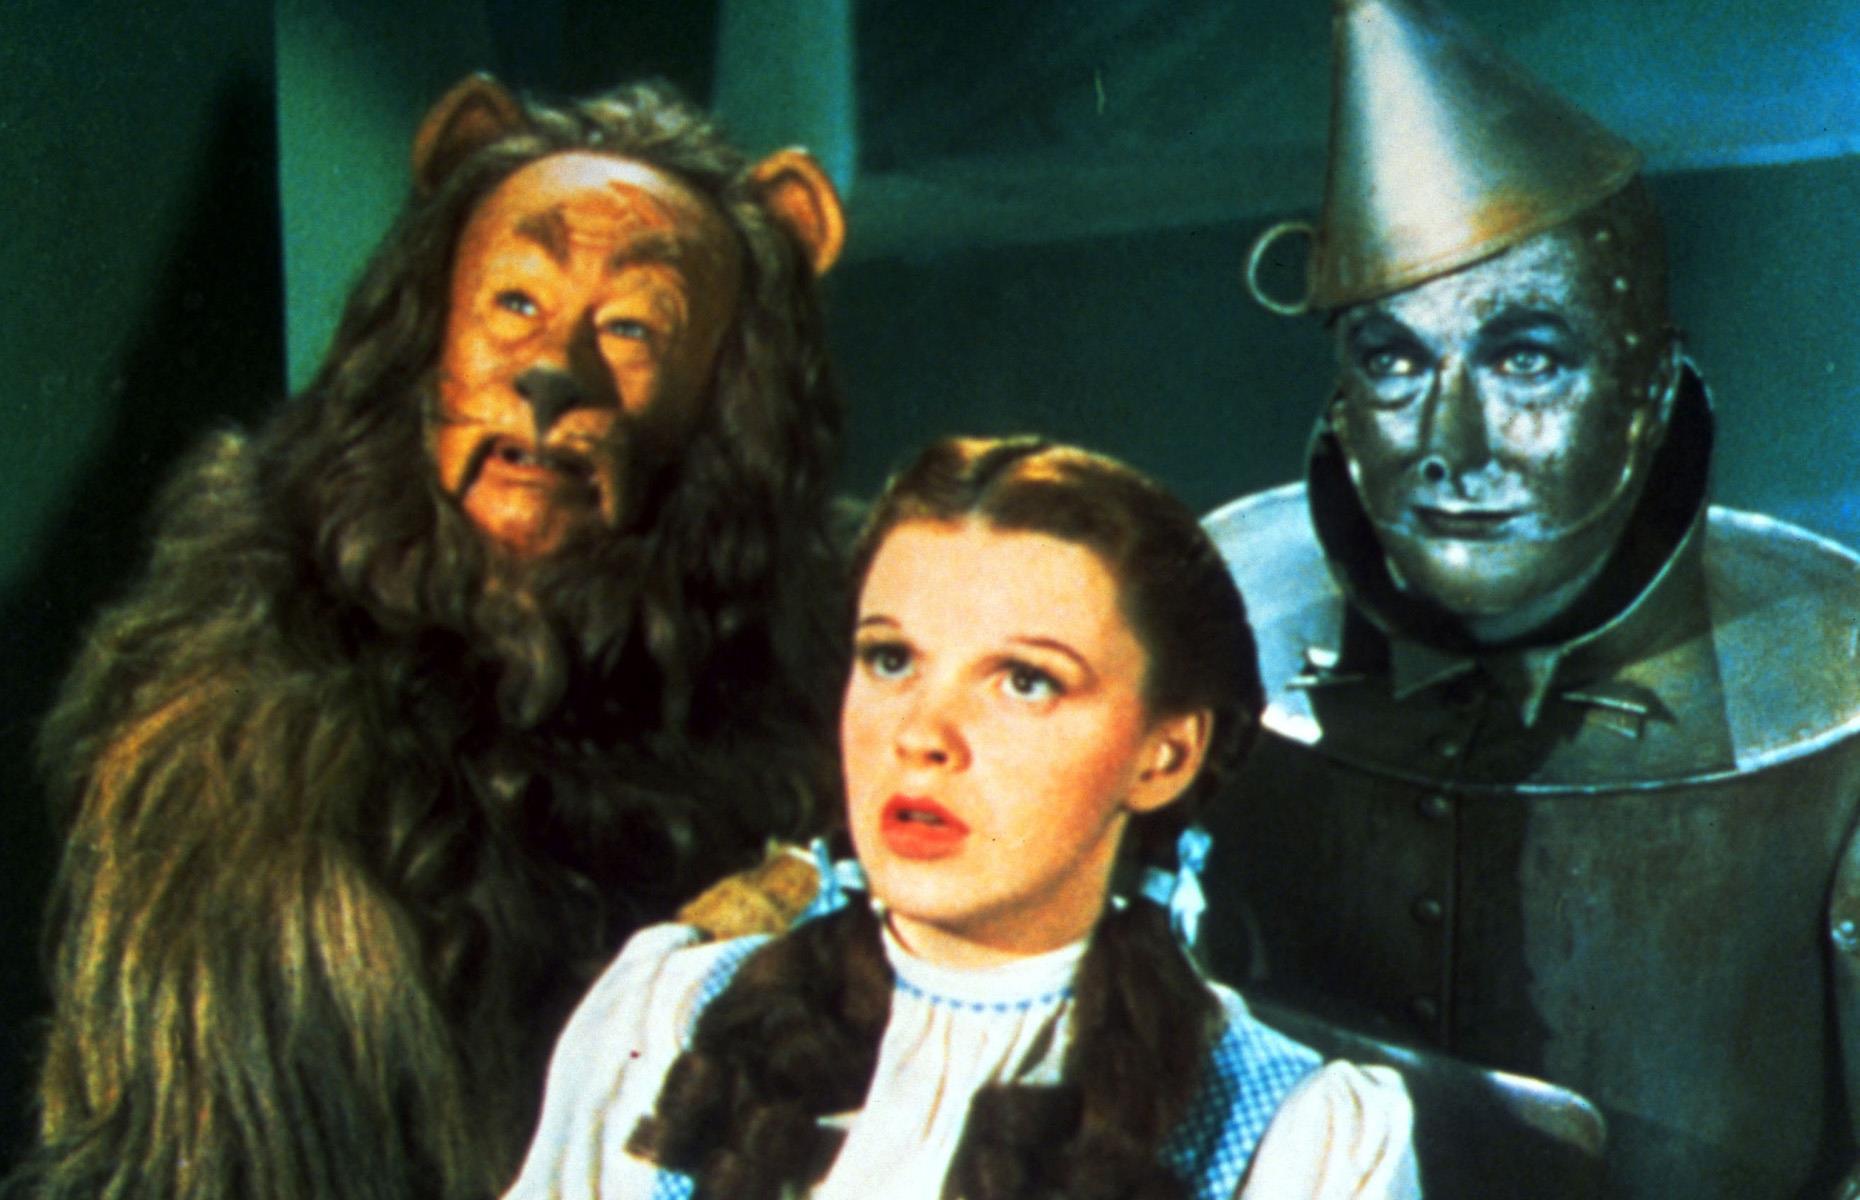 The Wizard of Oz (1939) Cowardly Lion costume: $3 million (£2.6m)